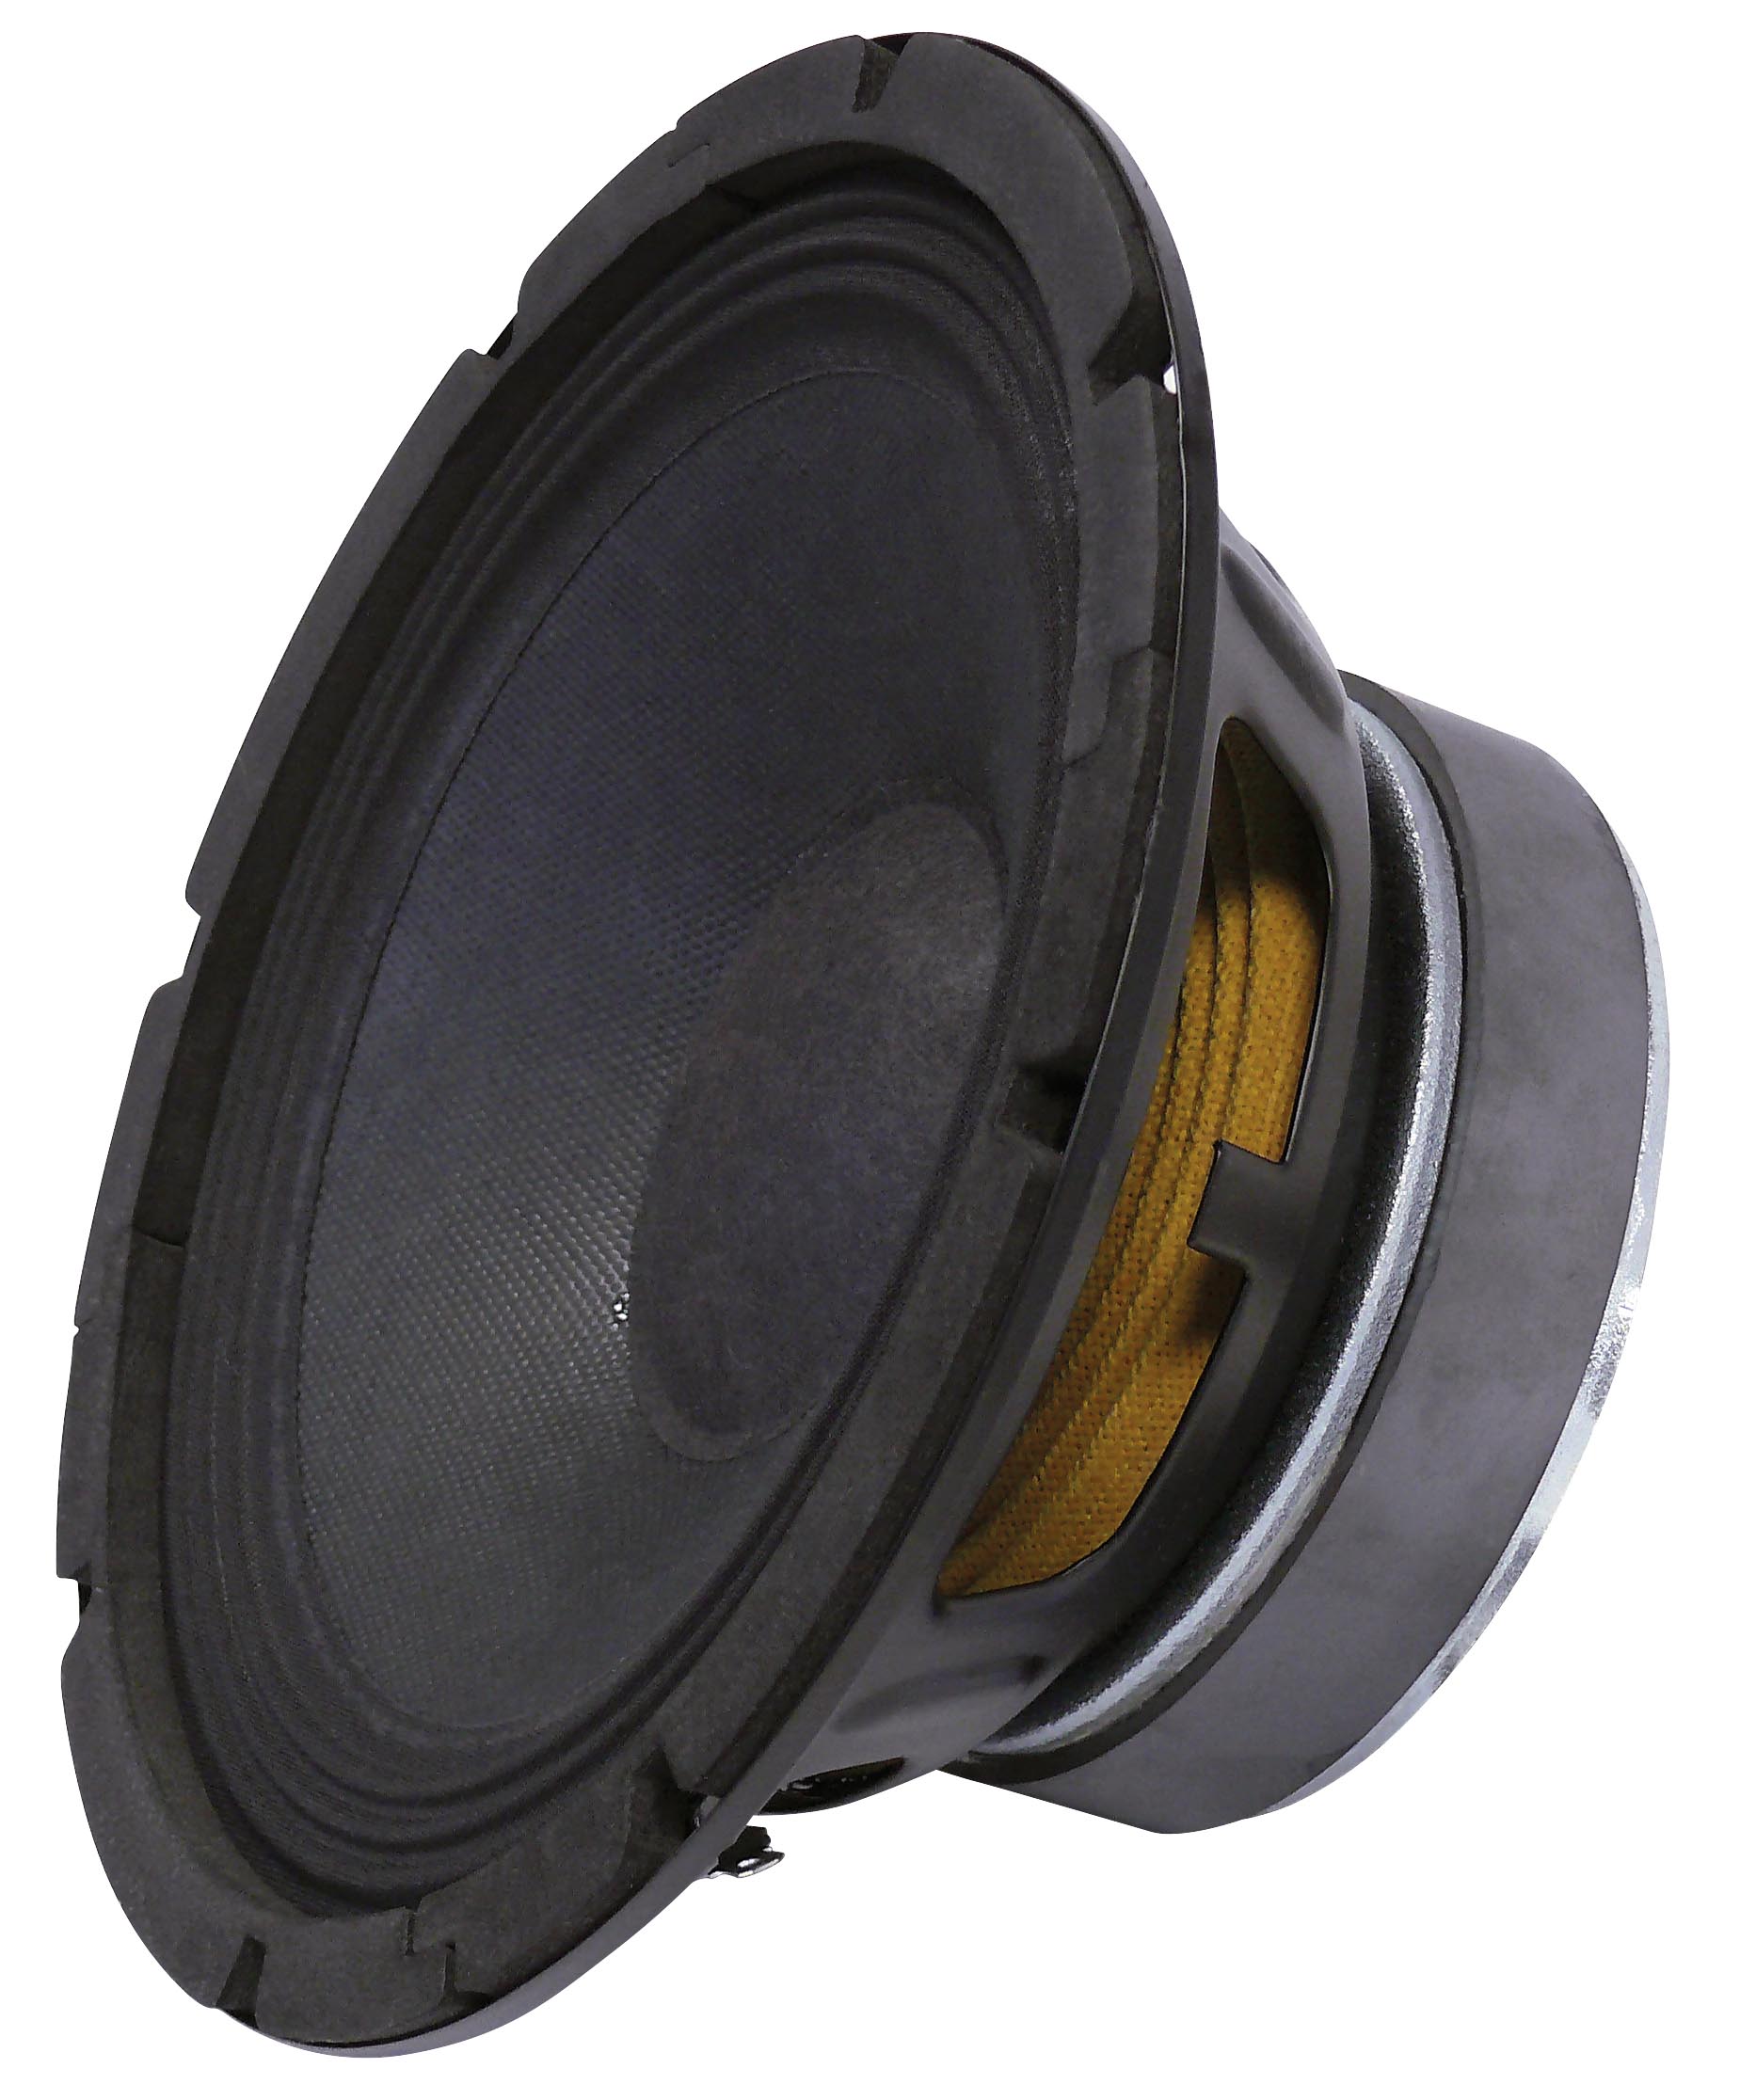 McGee PA Subwoofer 200 mm